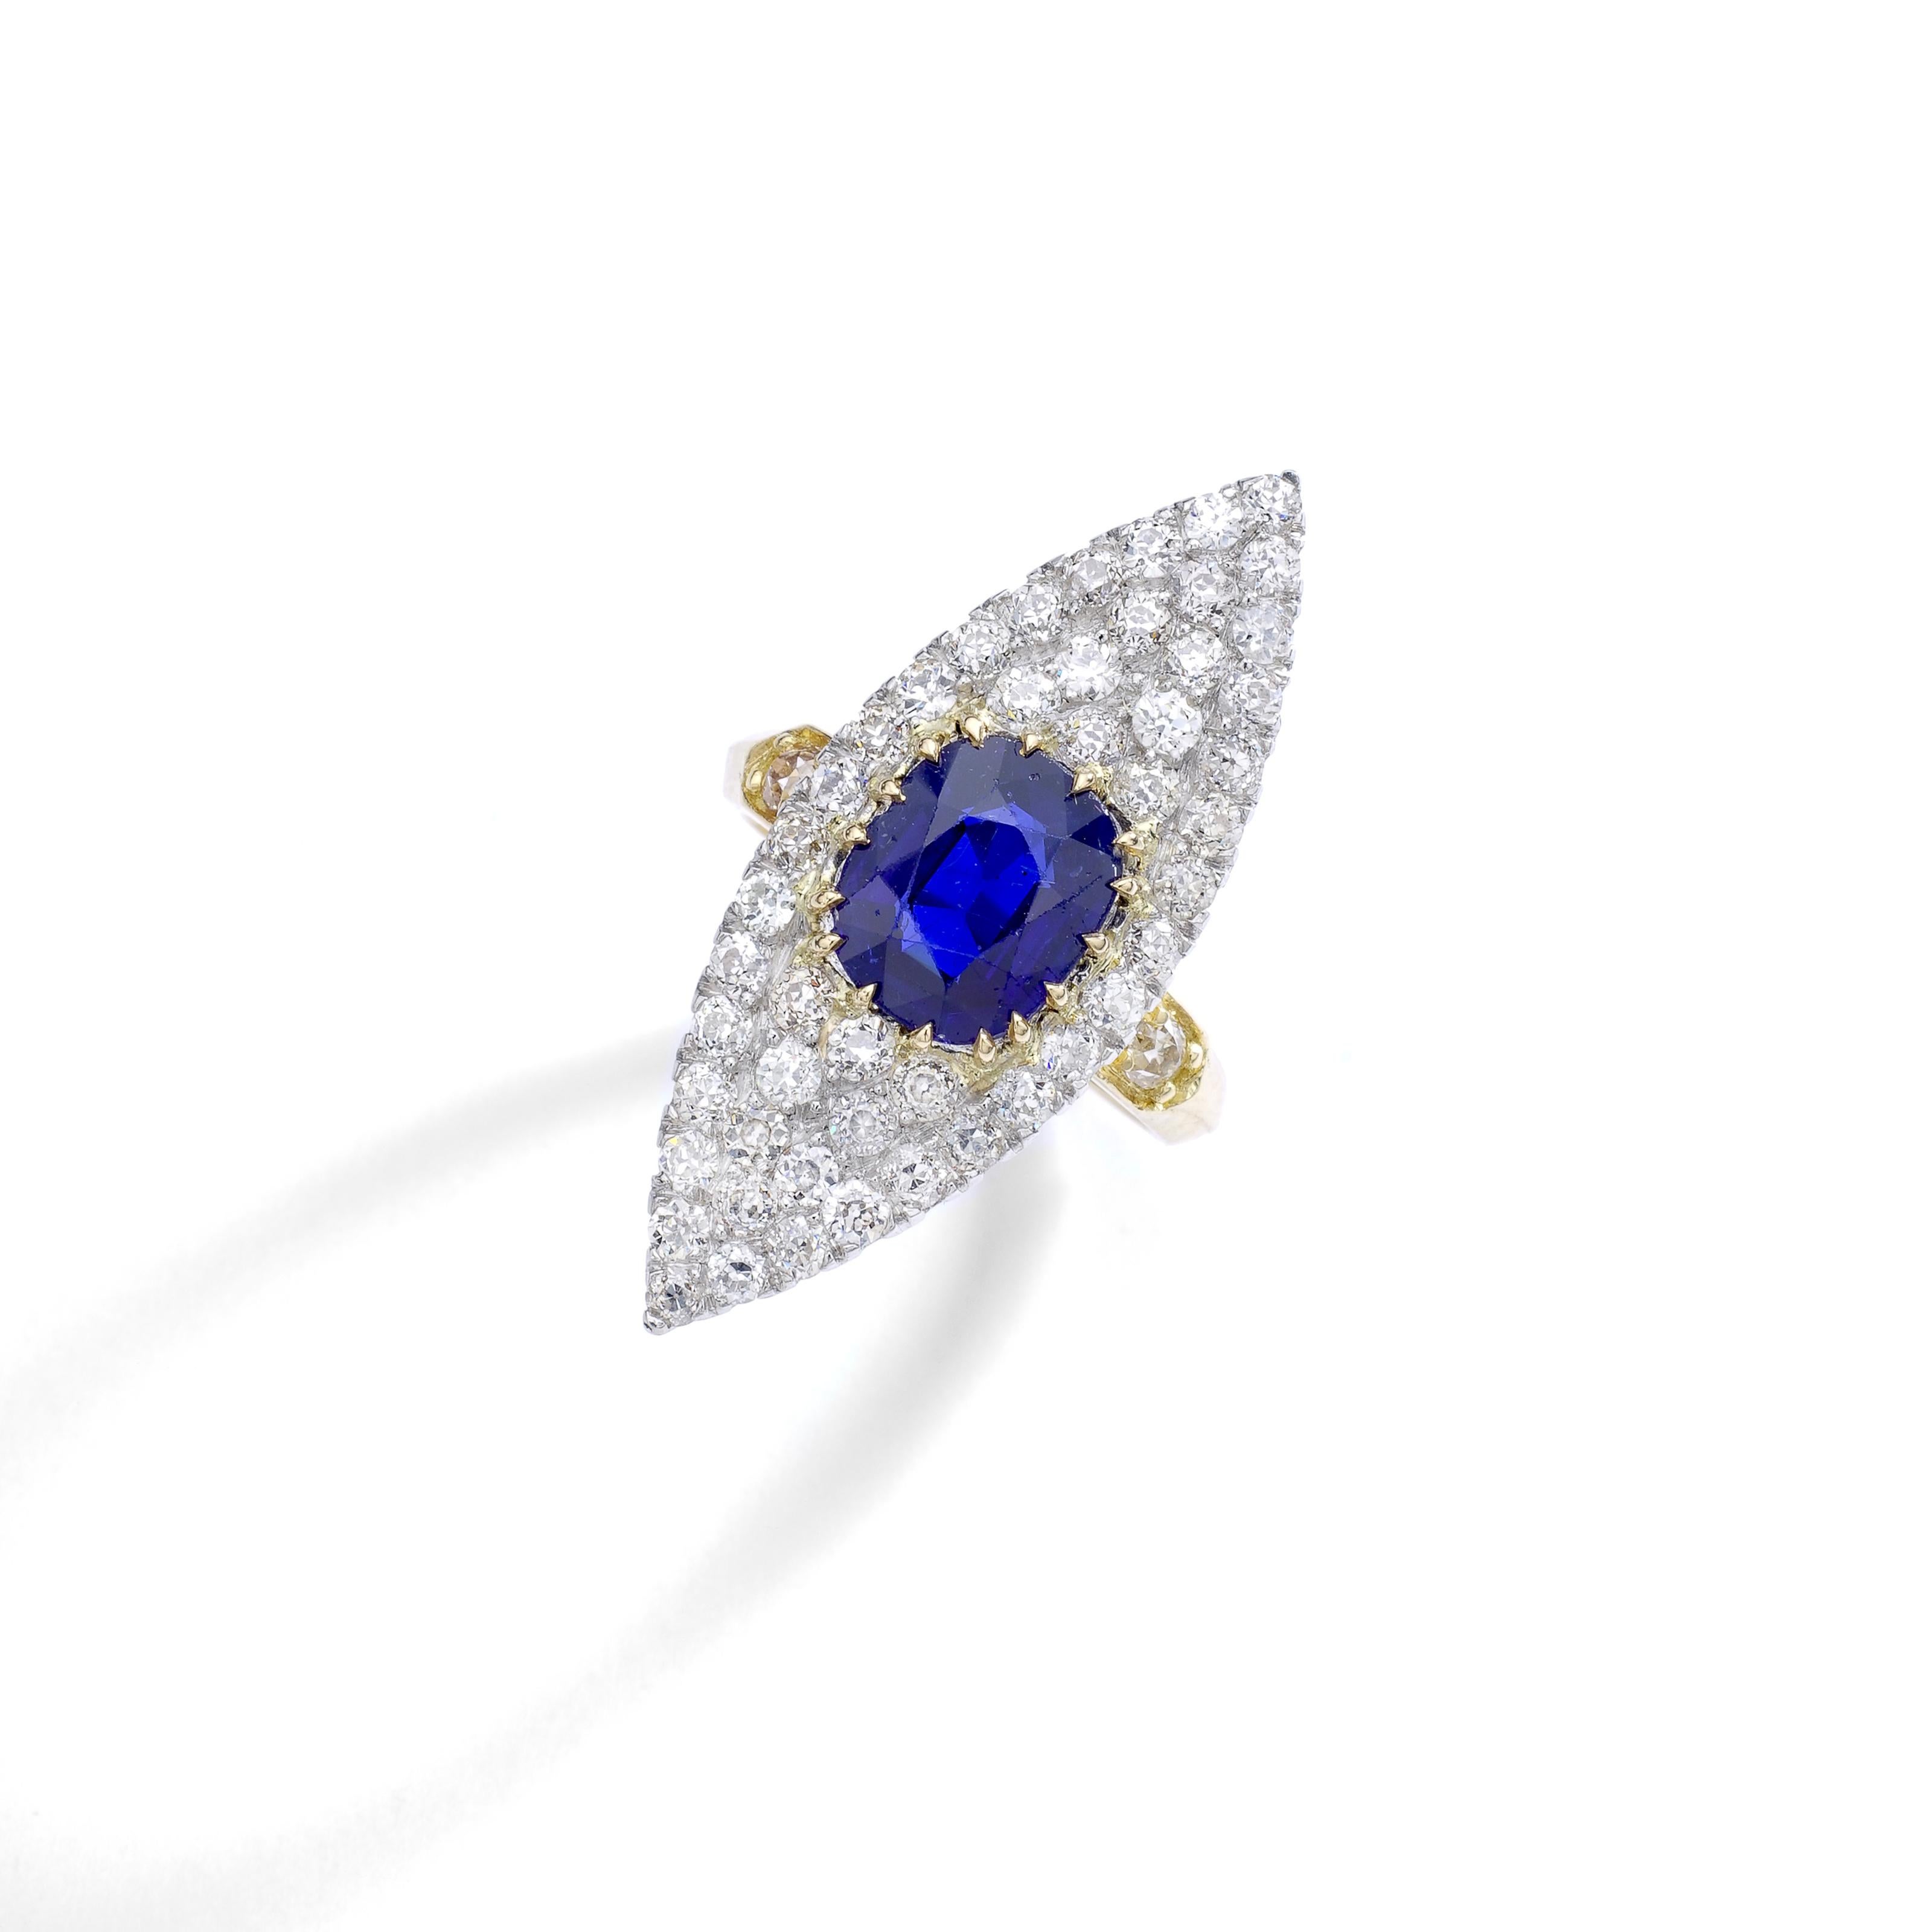 An Antique Marquise ring centered by a cushion Natural Sapphire (approximately 2.88 carat) surrounded by Old mine cut Diamond mounted on platinum and yellow gold.
Circa 1910.
Ring size: 5 1/2 US.